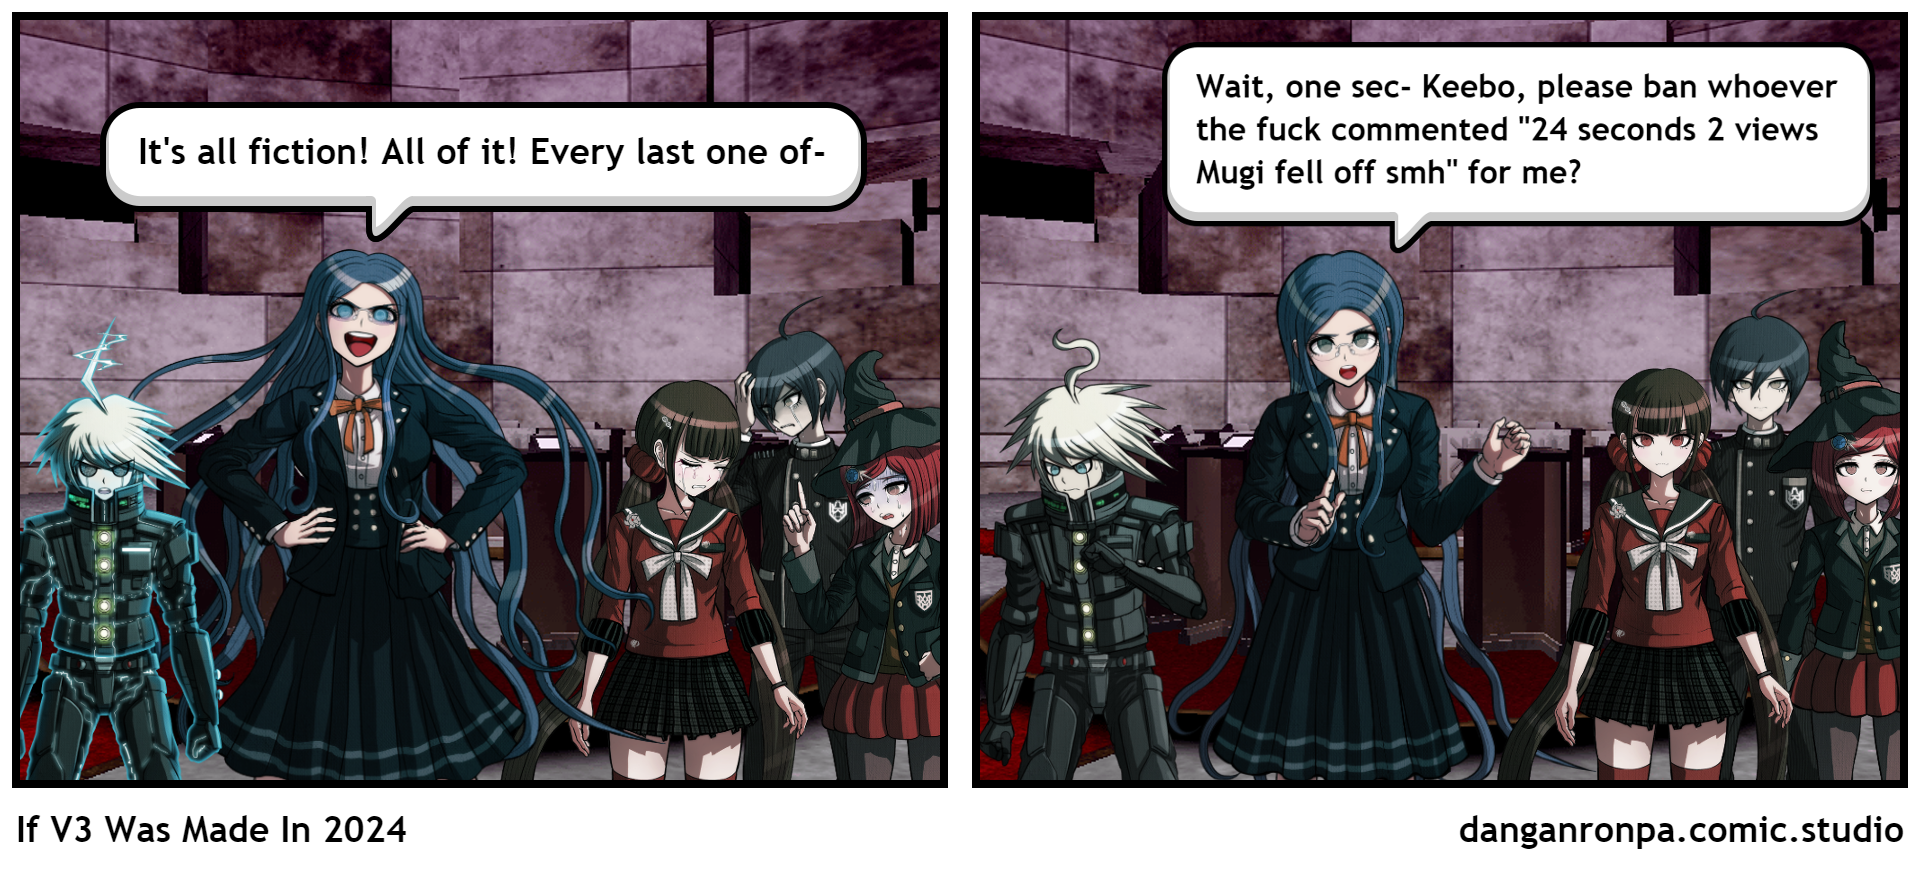 If V3 Was Made In 2024